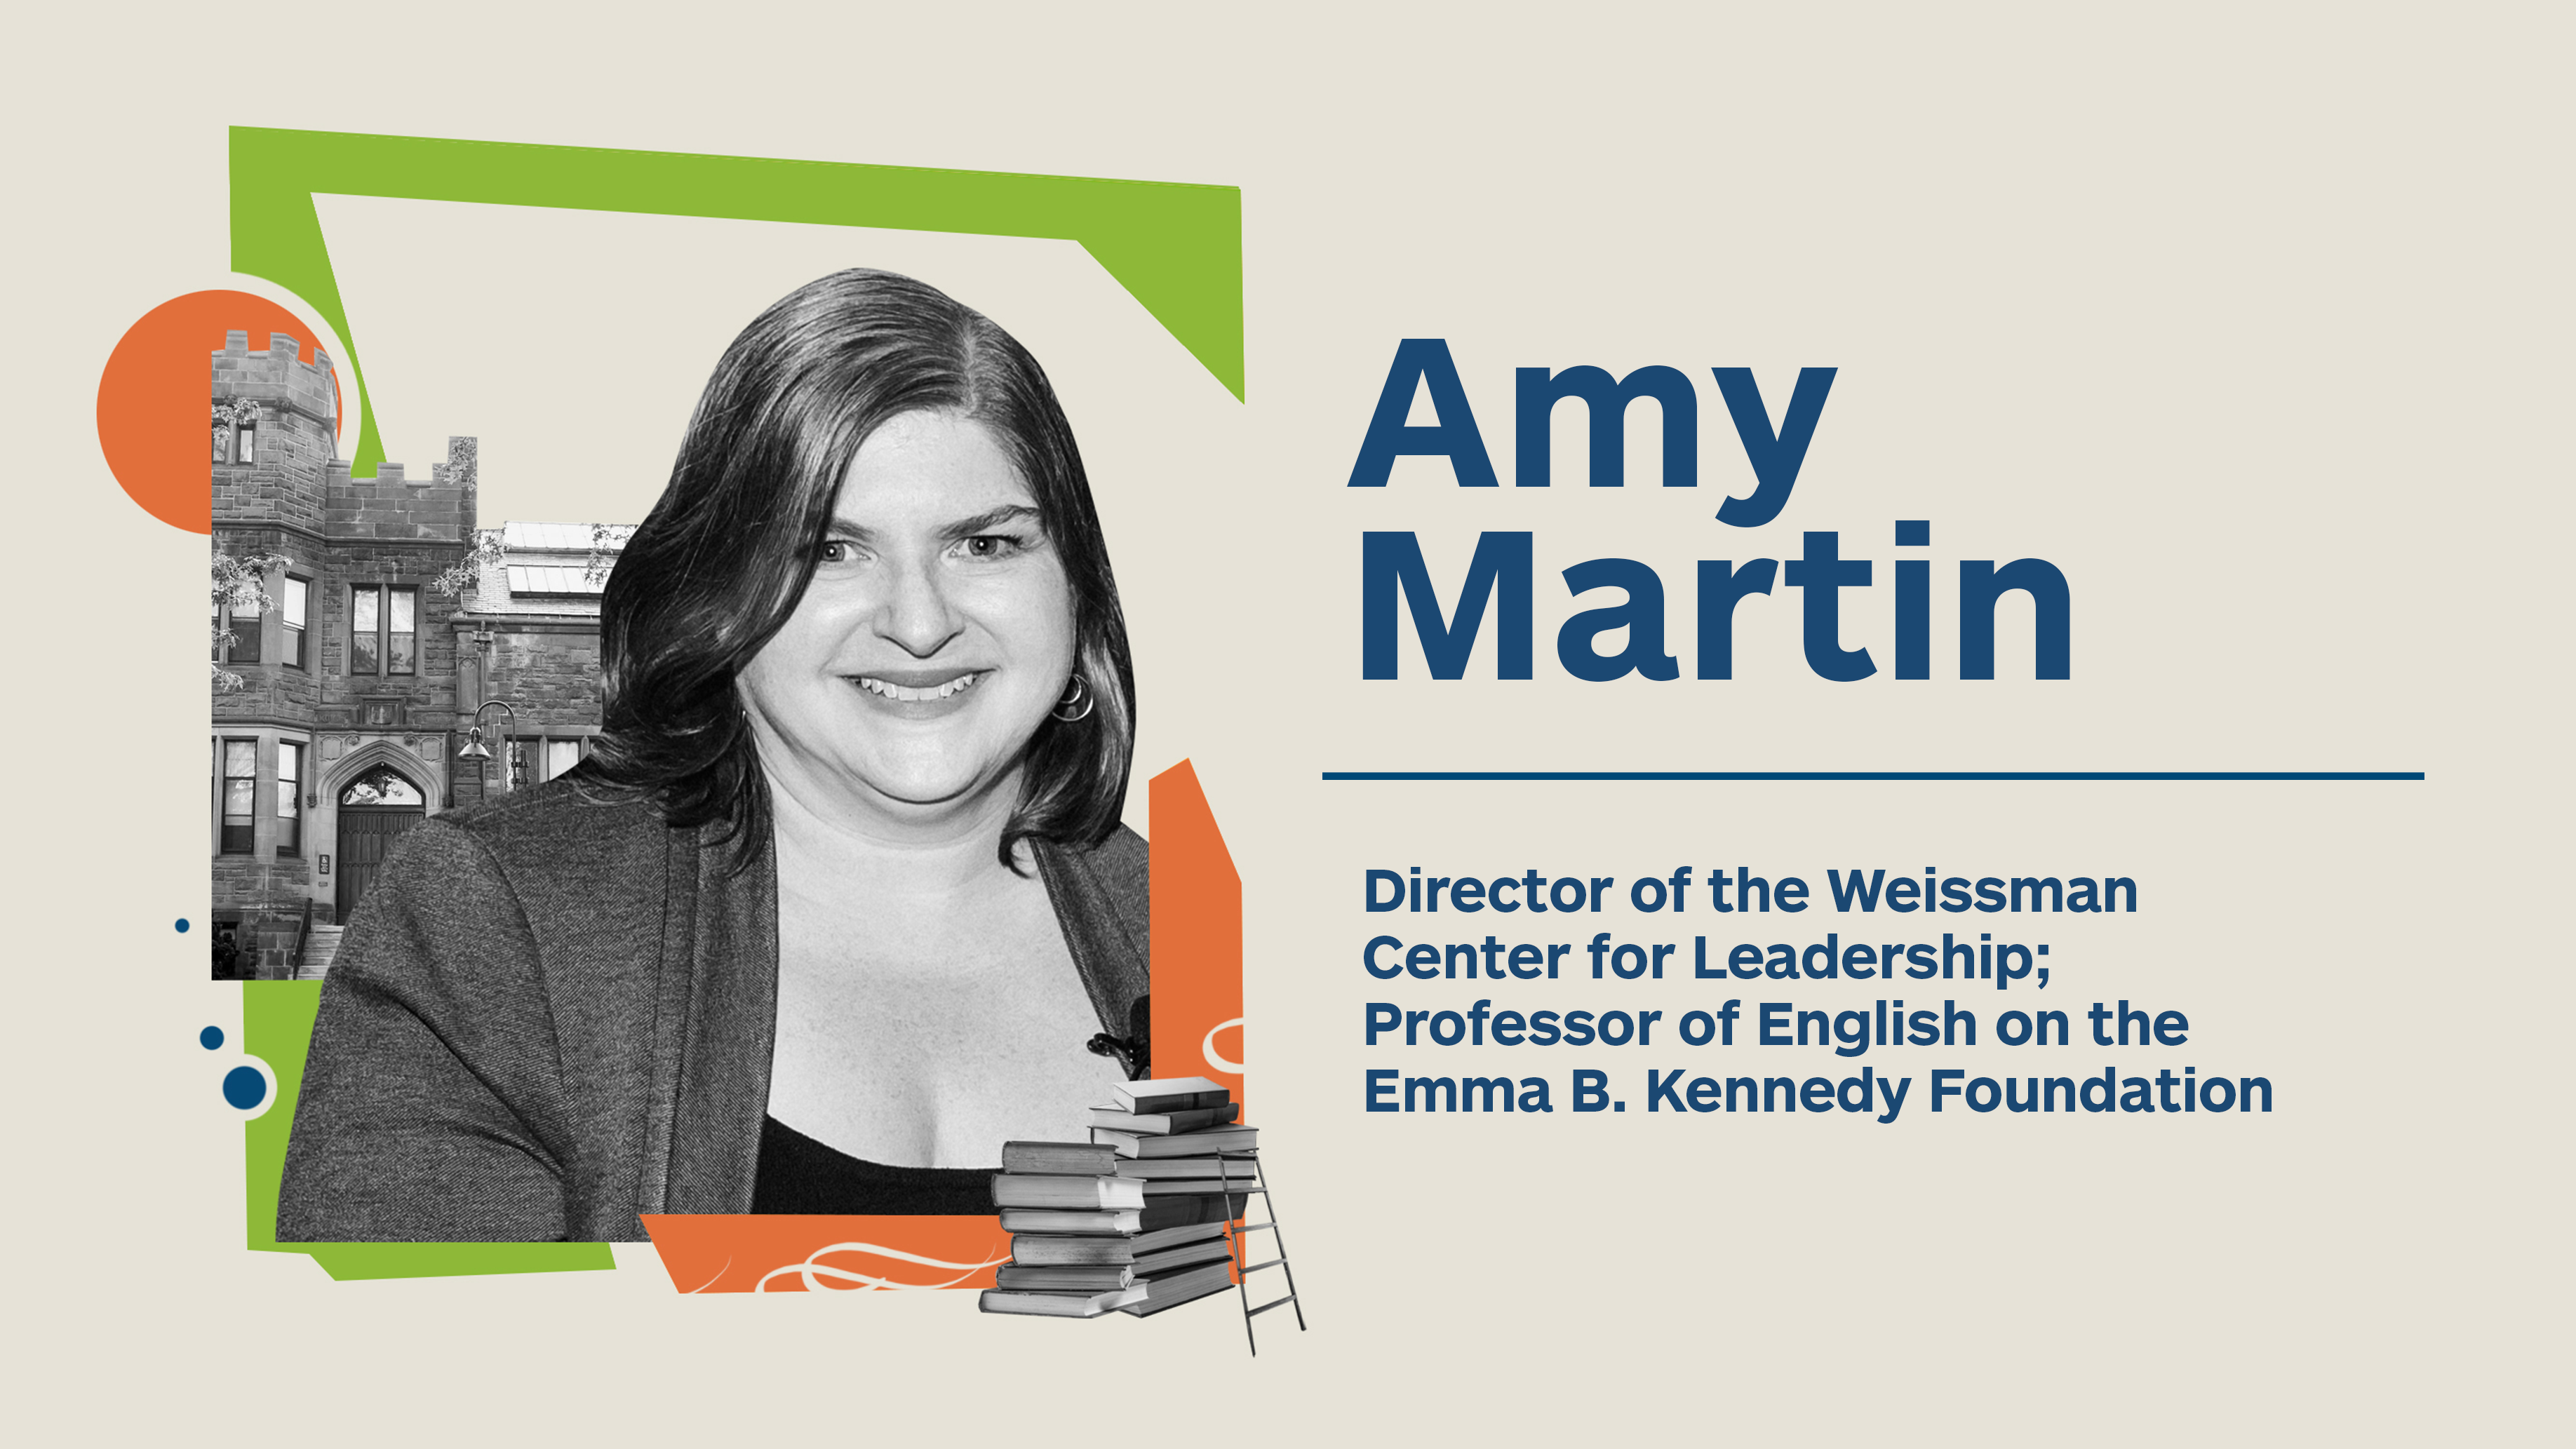 Amy Martin, Director of the Weissman Center for Leadership; Professor of English on the Emma B. Kennedy Foundation